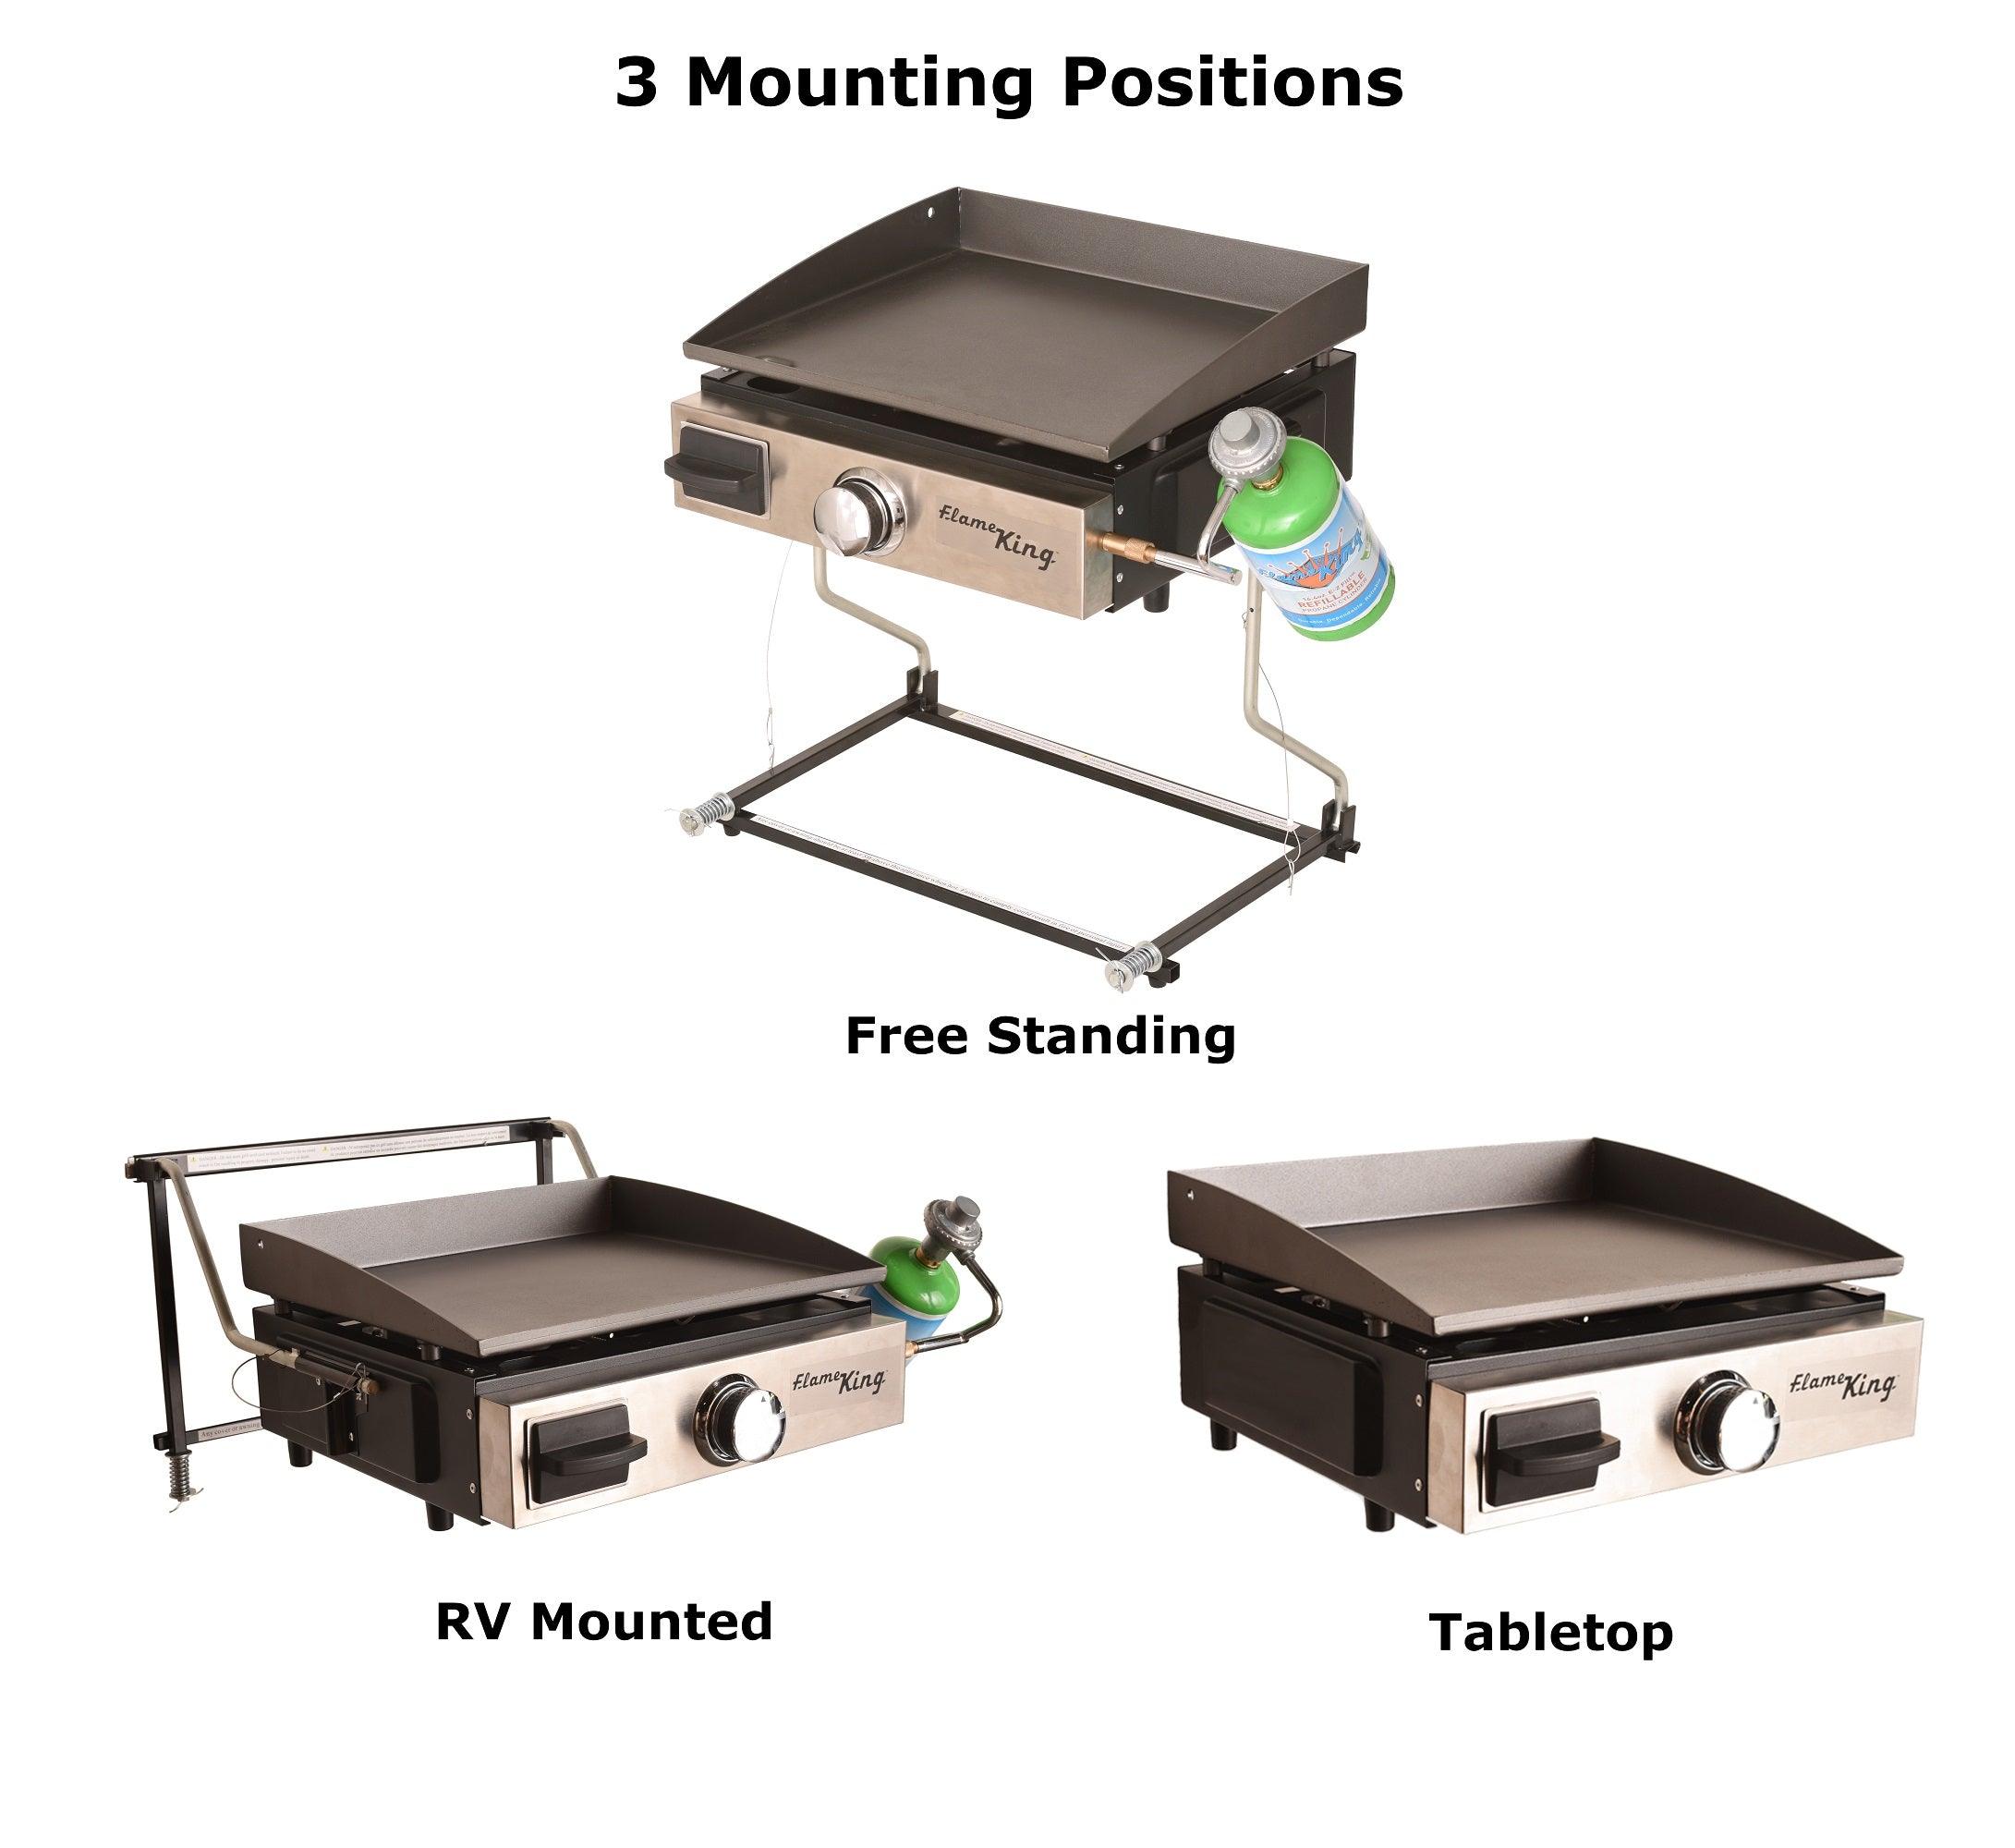 Flame King Portable Outdoor Propane Oven Stove Combo